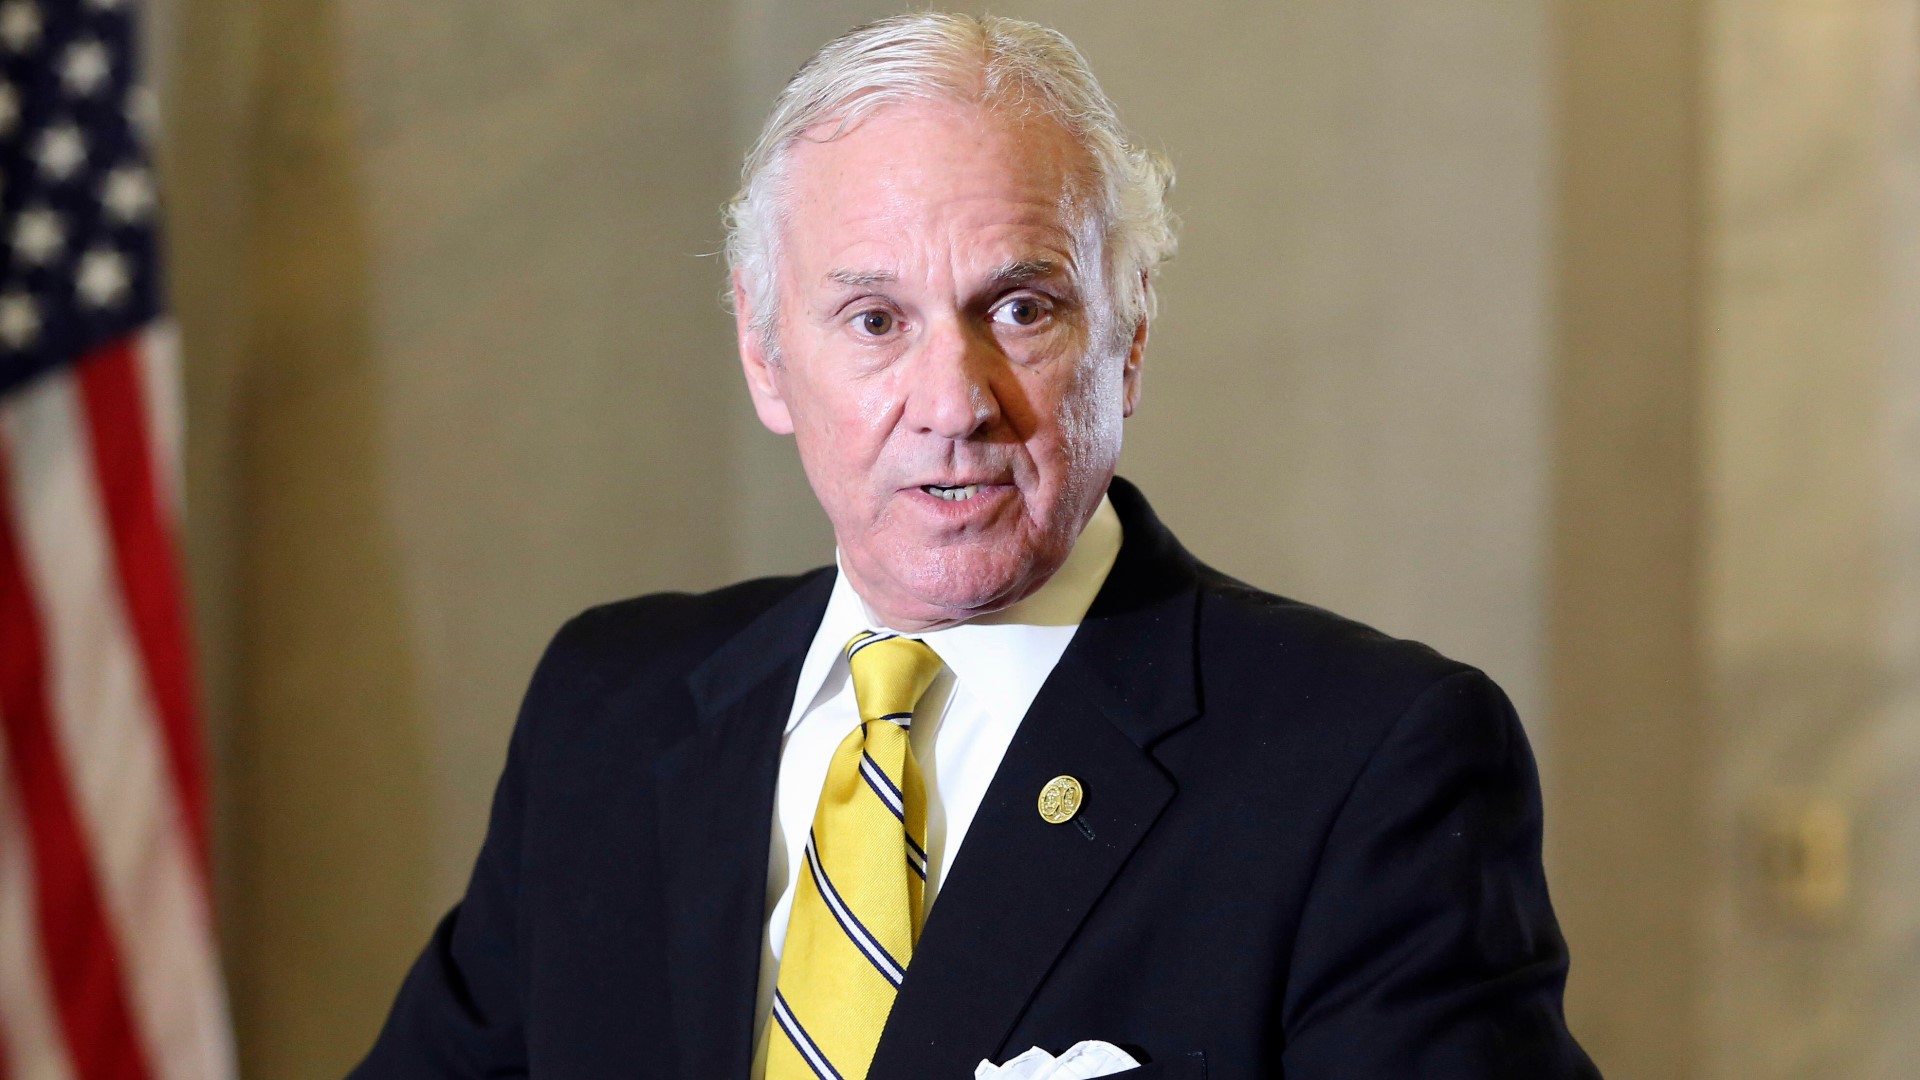 South Carolina Gov. Henry McMaster says he wants to prohibit targeted door to door vaccine efforts in the state.